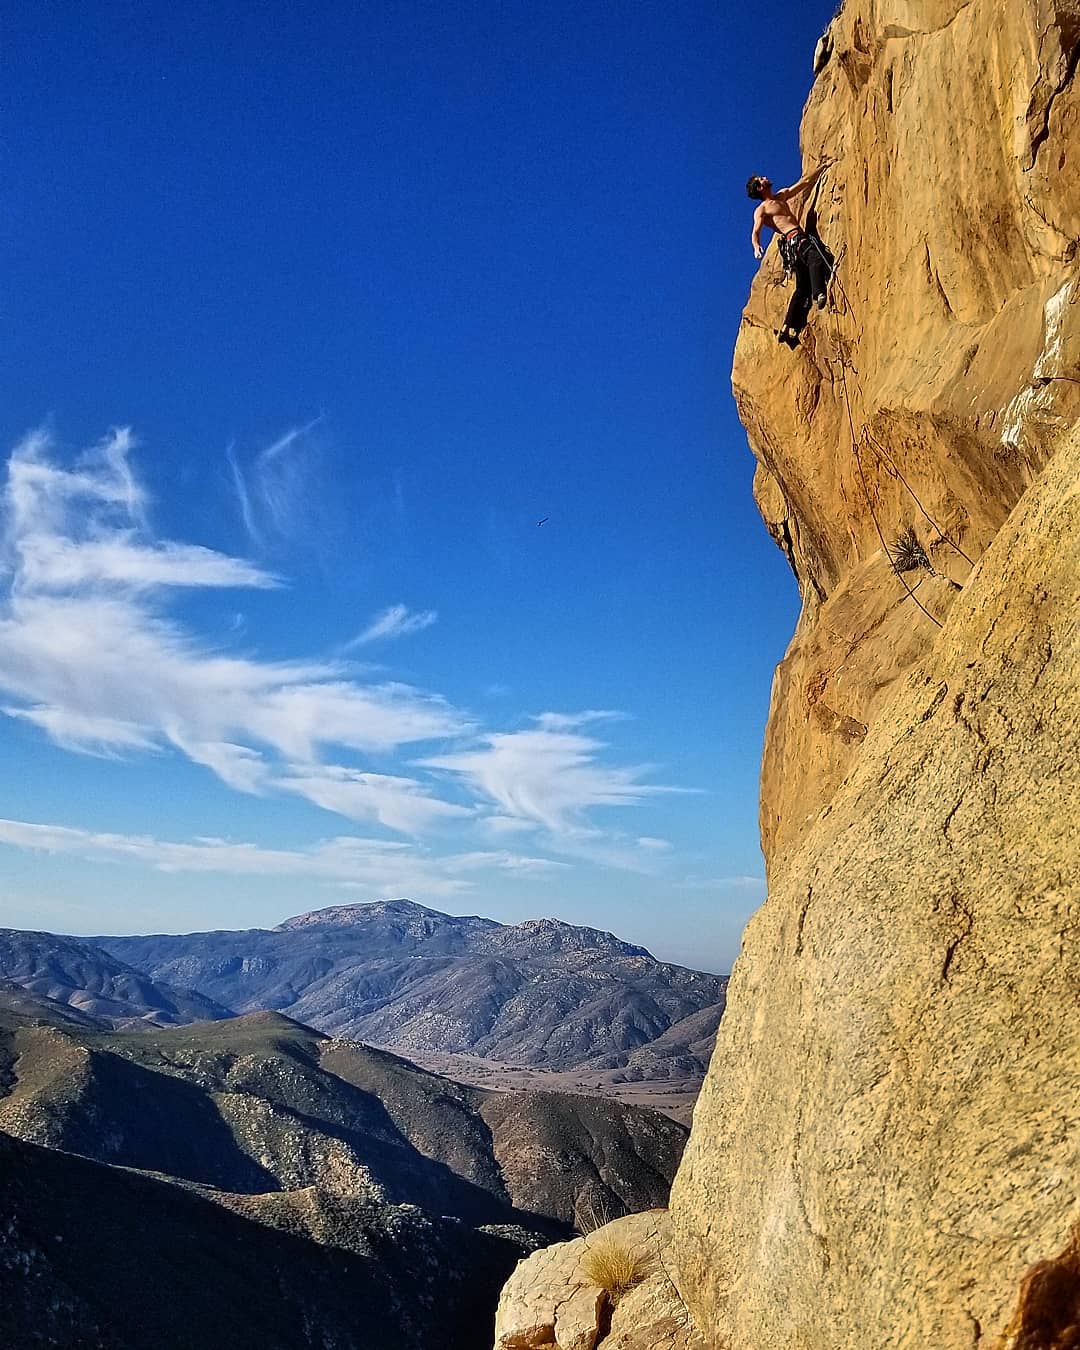 It's an Eagle Peak kind of day! Get out there while the weather lasts...@thecosmicclimber on the infamous 3 pitch climb "Soy Chango" one of the few overhanging jug hauls in the county...."Soy Chango, 5.11c, 3 pitches, Eagle Peak"...#chillinorockclimbing #rockclimbing #sandiego #sandiegorockclimbing #guide #guiding #optoutside #neverstopexploring #climbing_pictures_of_instagram  #climb #klettern...@thecosmicclimber